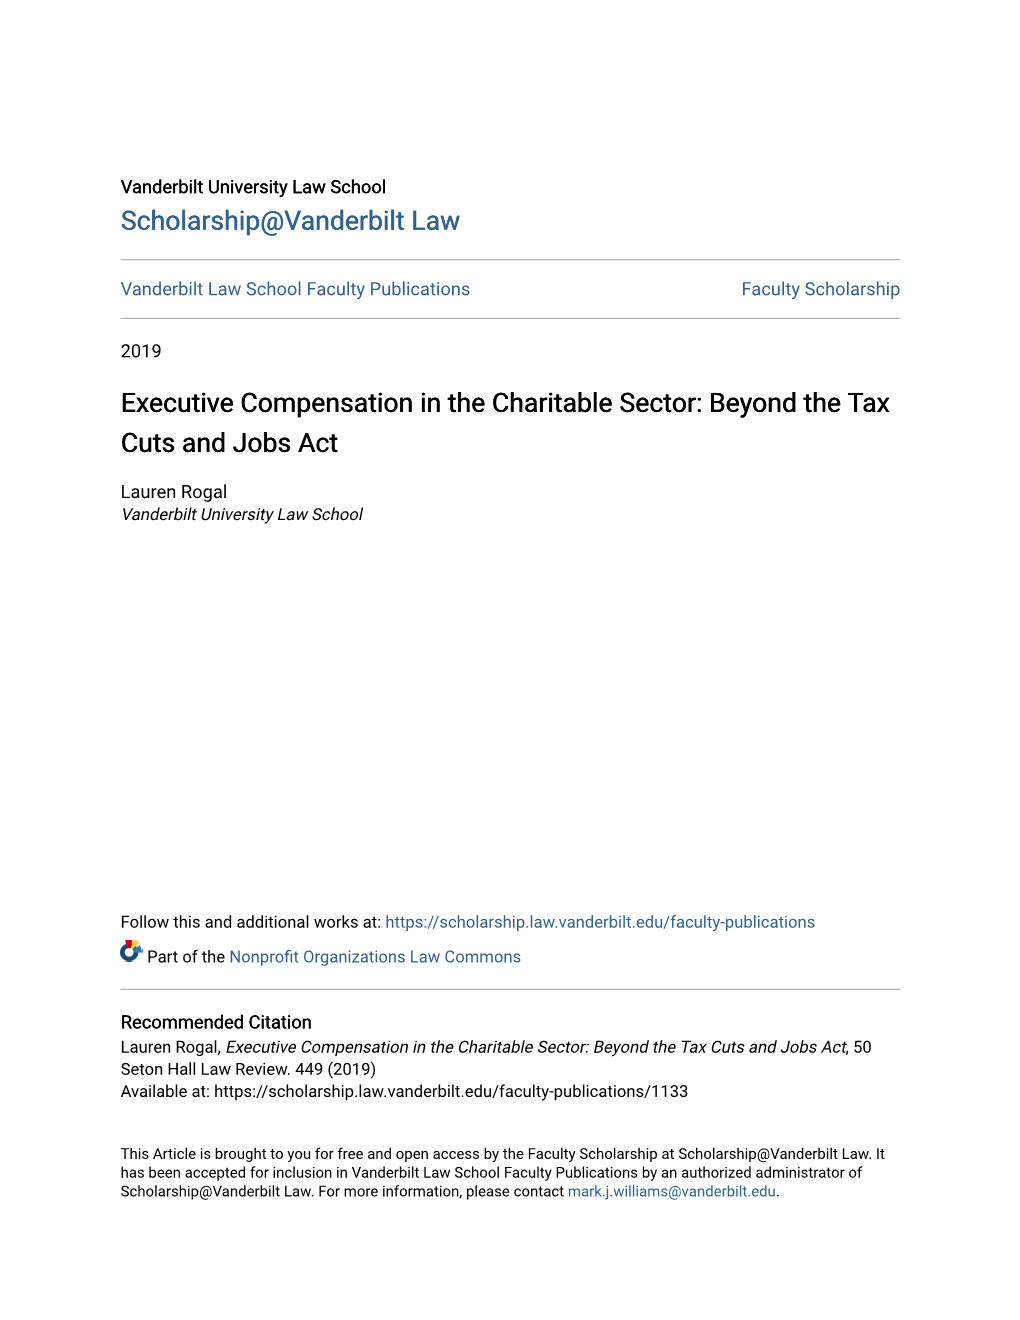 Executive Compensation in the Charitable Sector: Beyond the Tax Cuts and Jobs Act